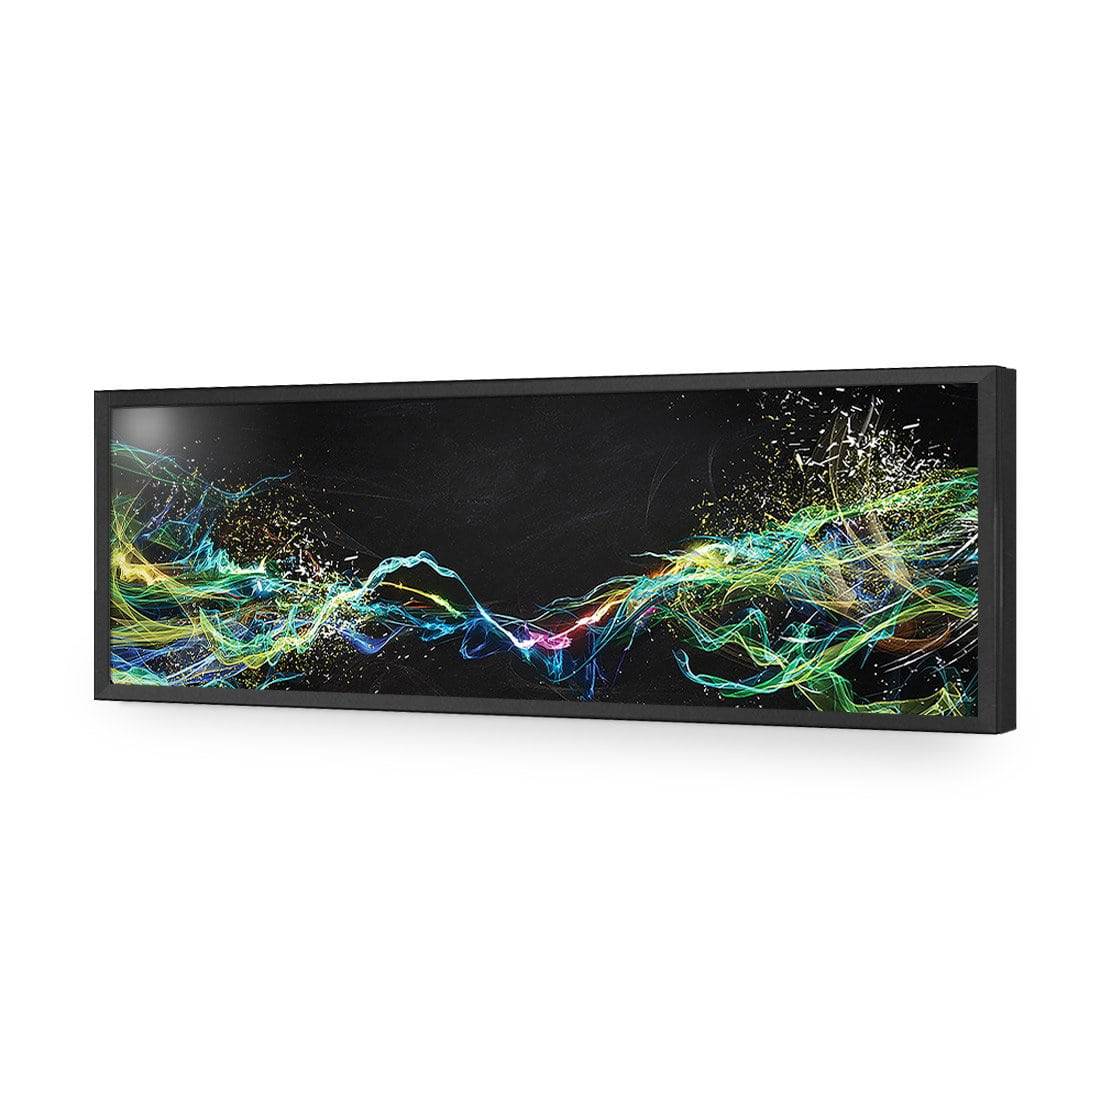 Electricity On Black, Long-Acrylic-Wall Art Design-Without Border-Acrylic - Black Frame-60x20cm-Wall Art Designs